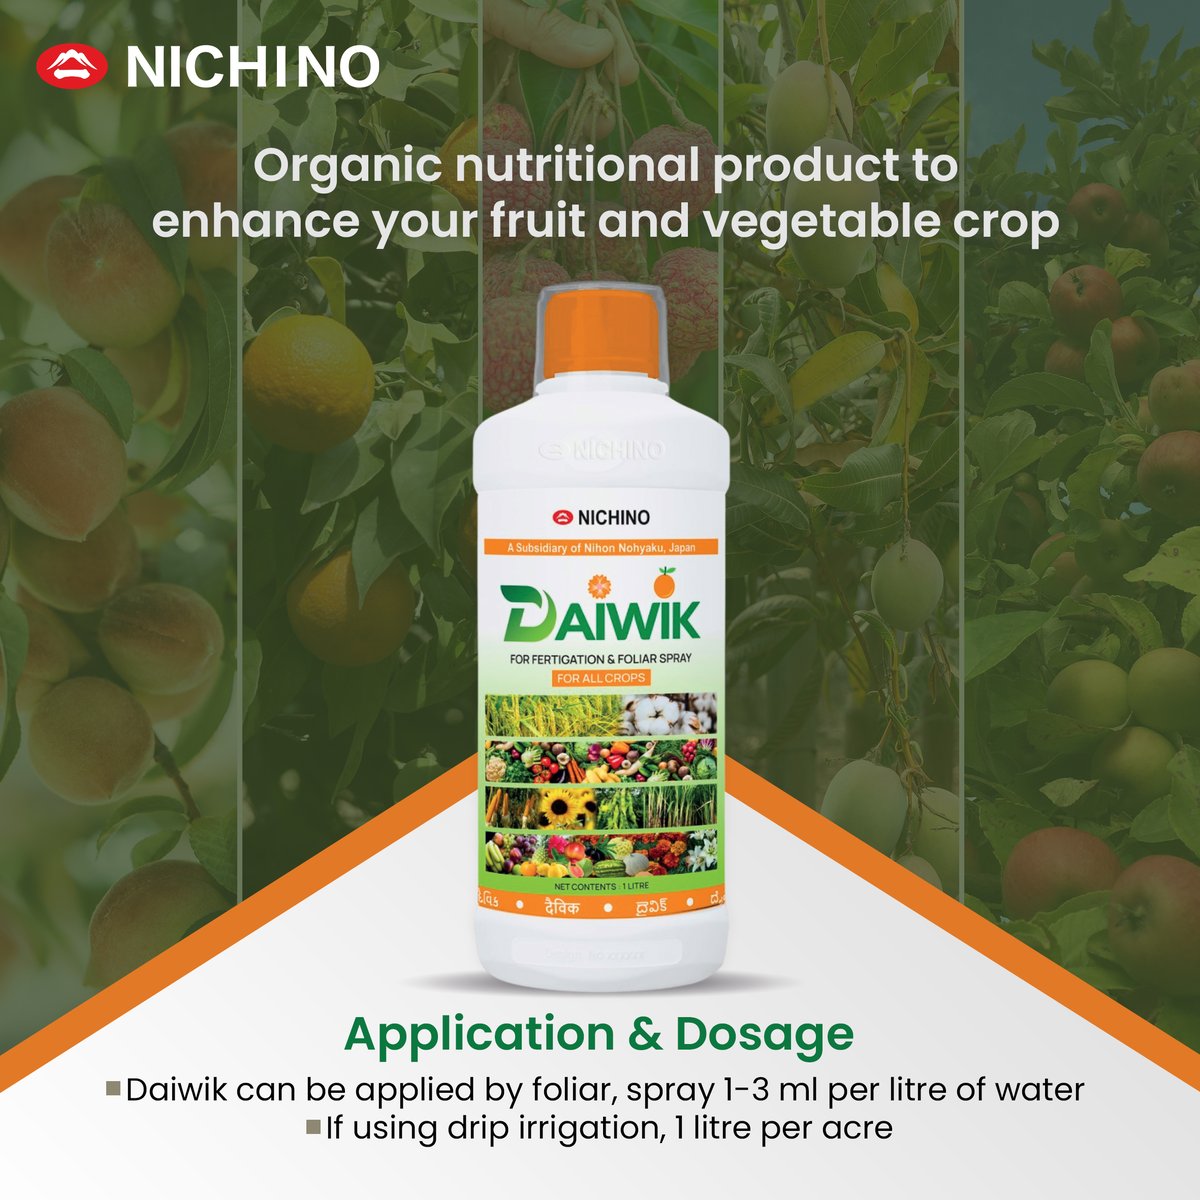 Daiwik is a product that is effective in almost all agricultural crops.

#daiwik #agriculture #biostimulant #cropprotection #nichinoindia